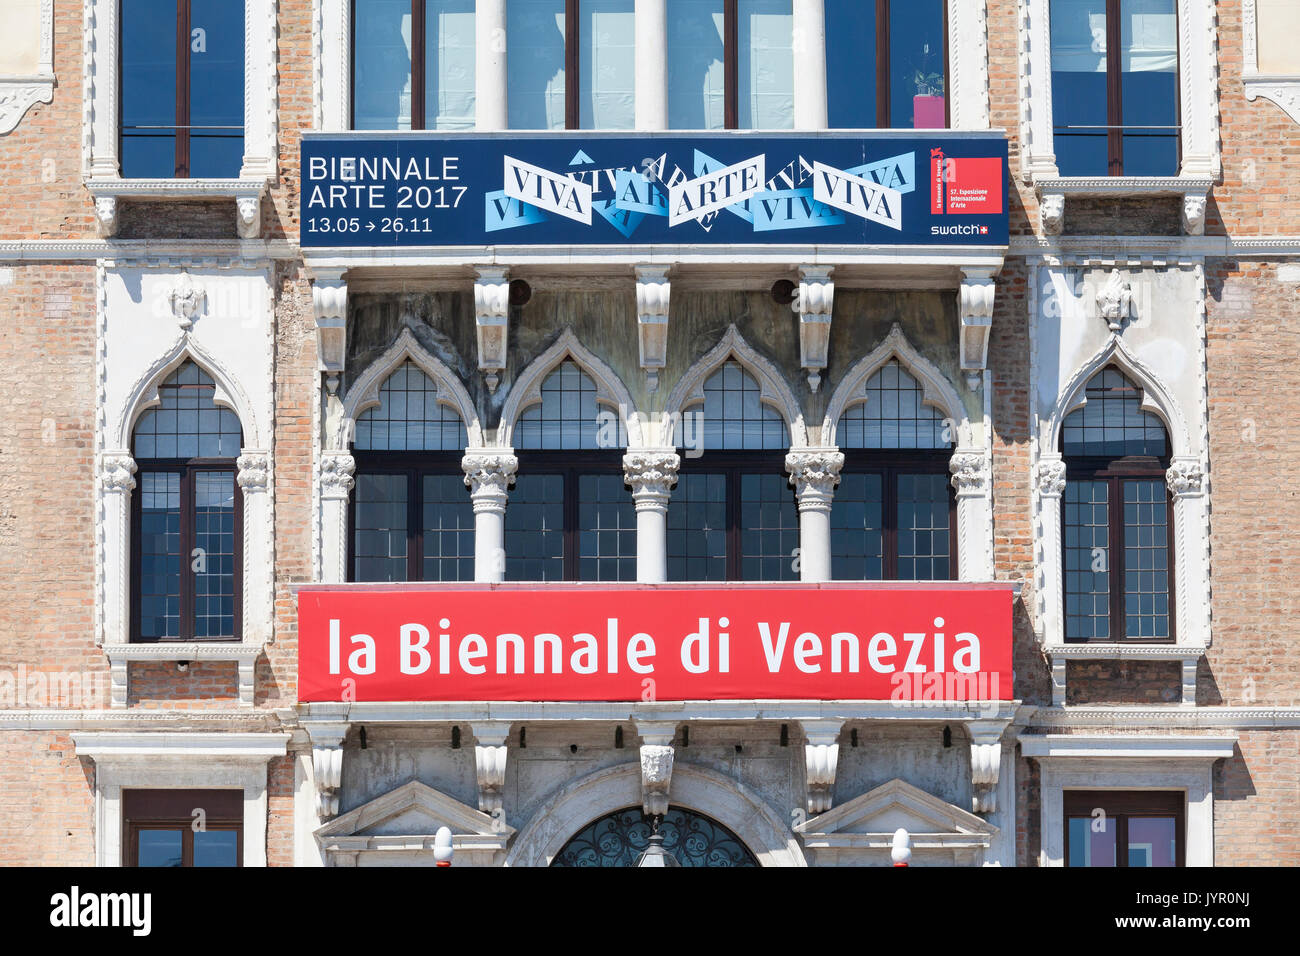 The Biennale di Venezia sign on the front of their offices in Venice, Veneto, Italy together with the  sign with their artwork  for the 2017 event dis Stock Photo